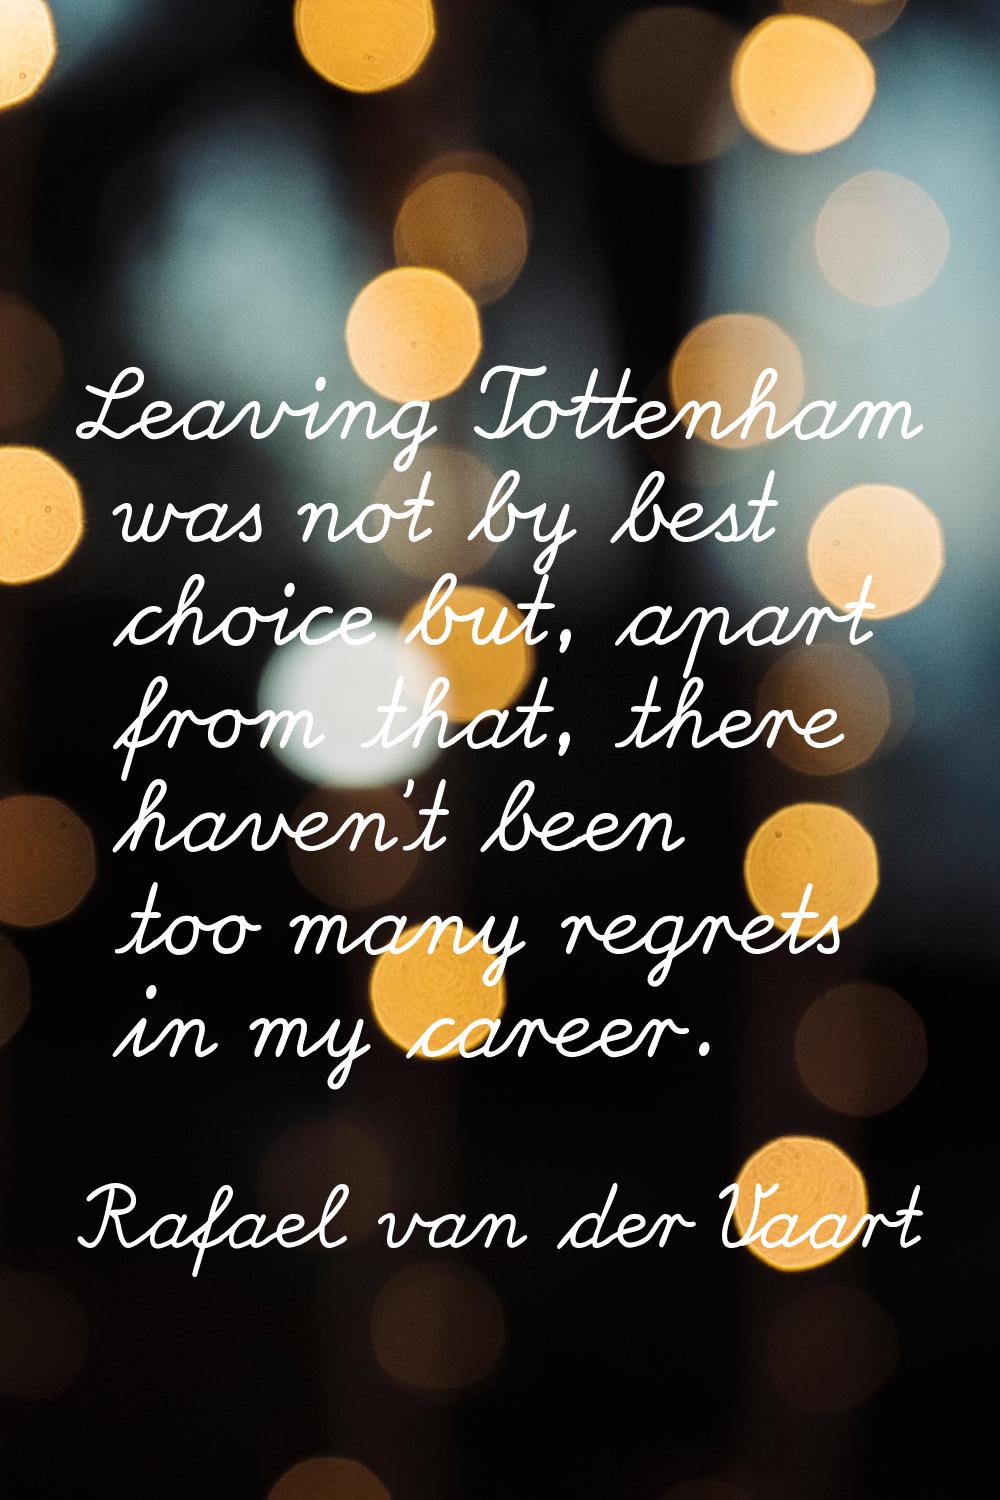 Leaving Tottenham was not by best choice but, apart from that, there haven't been too many regrets 